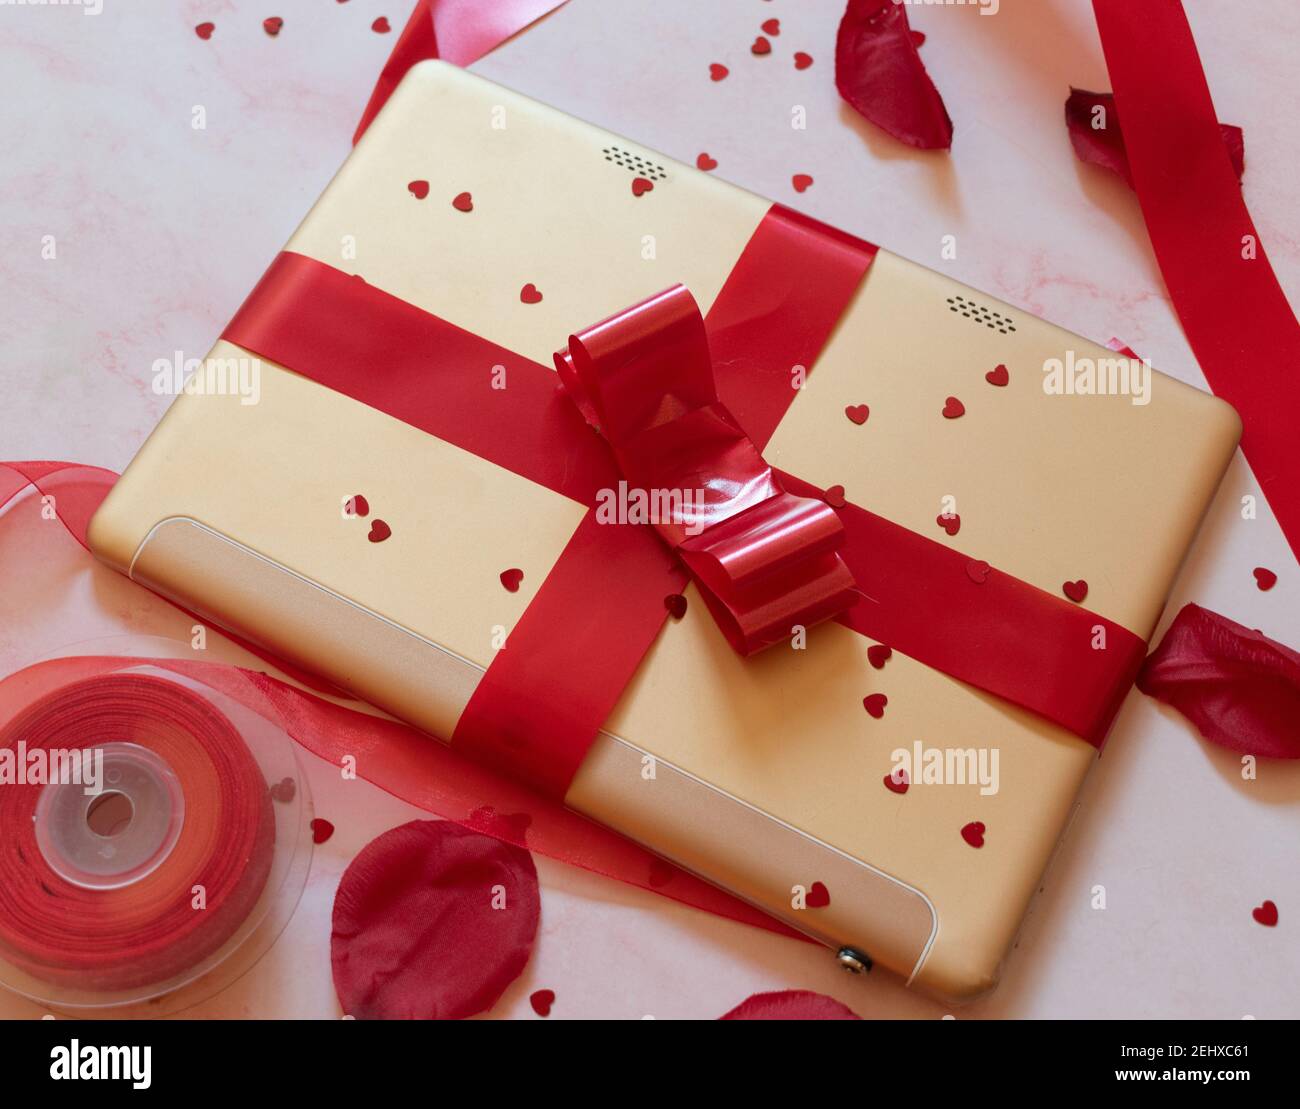 gift wrapped tablet with red bow and background ornaments Stock Photo